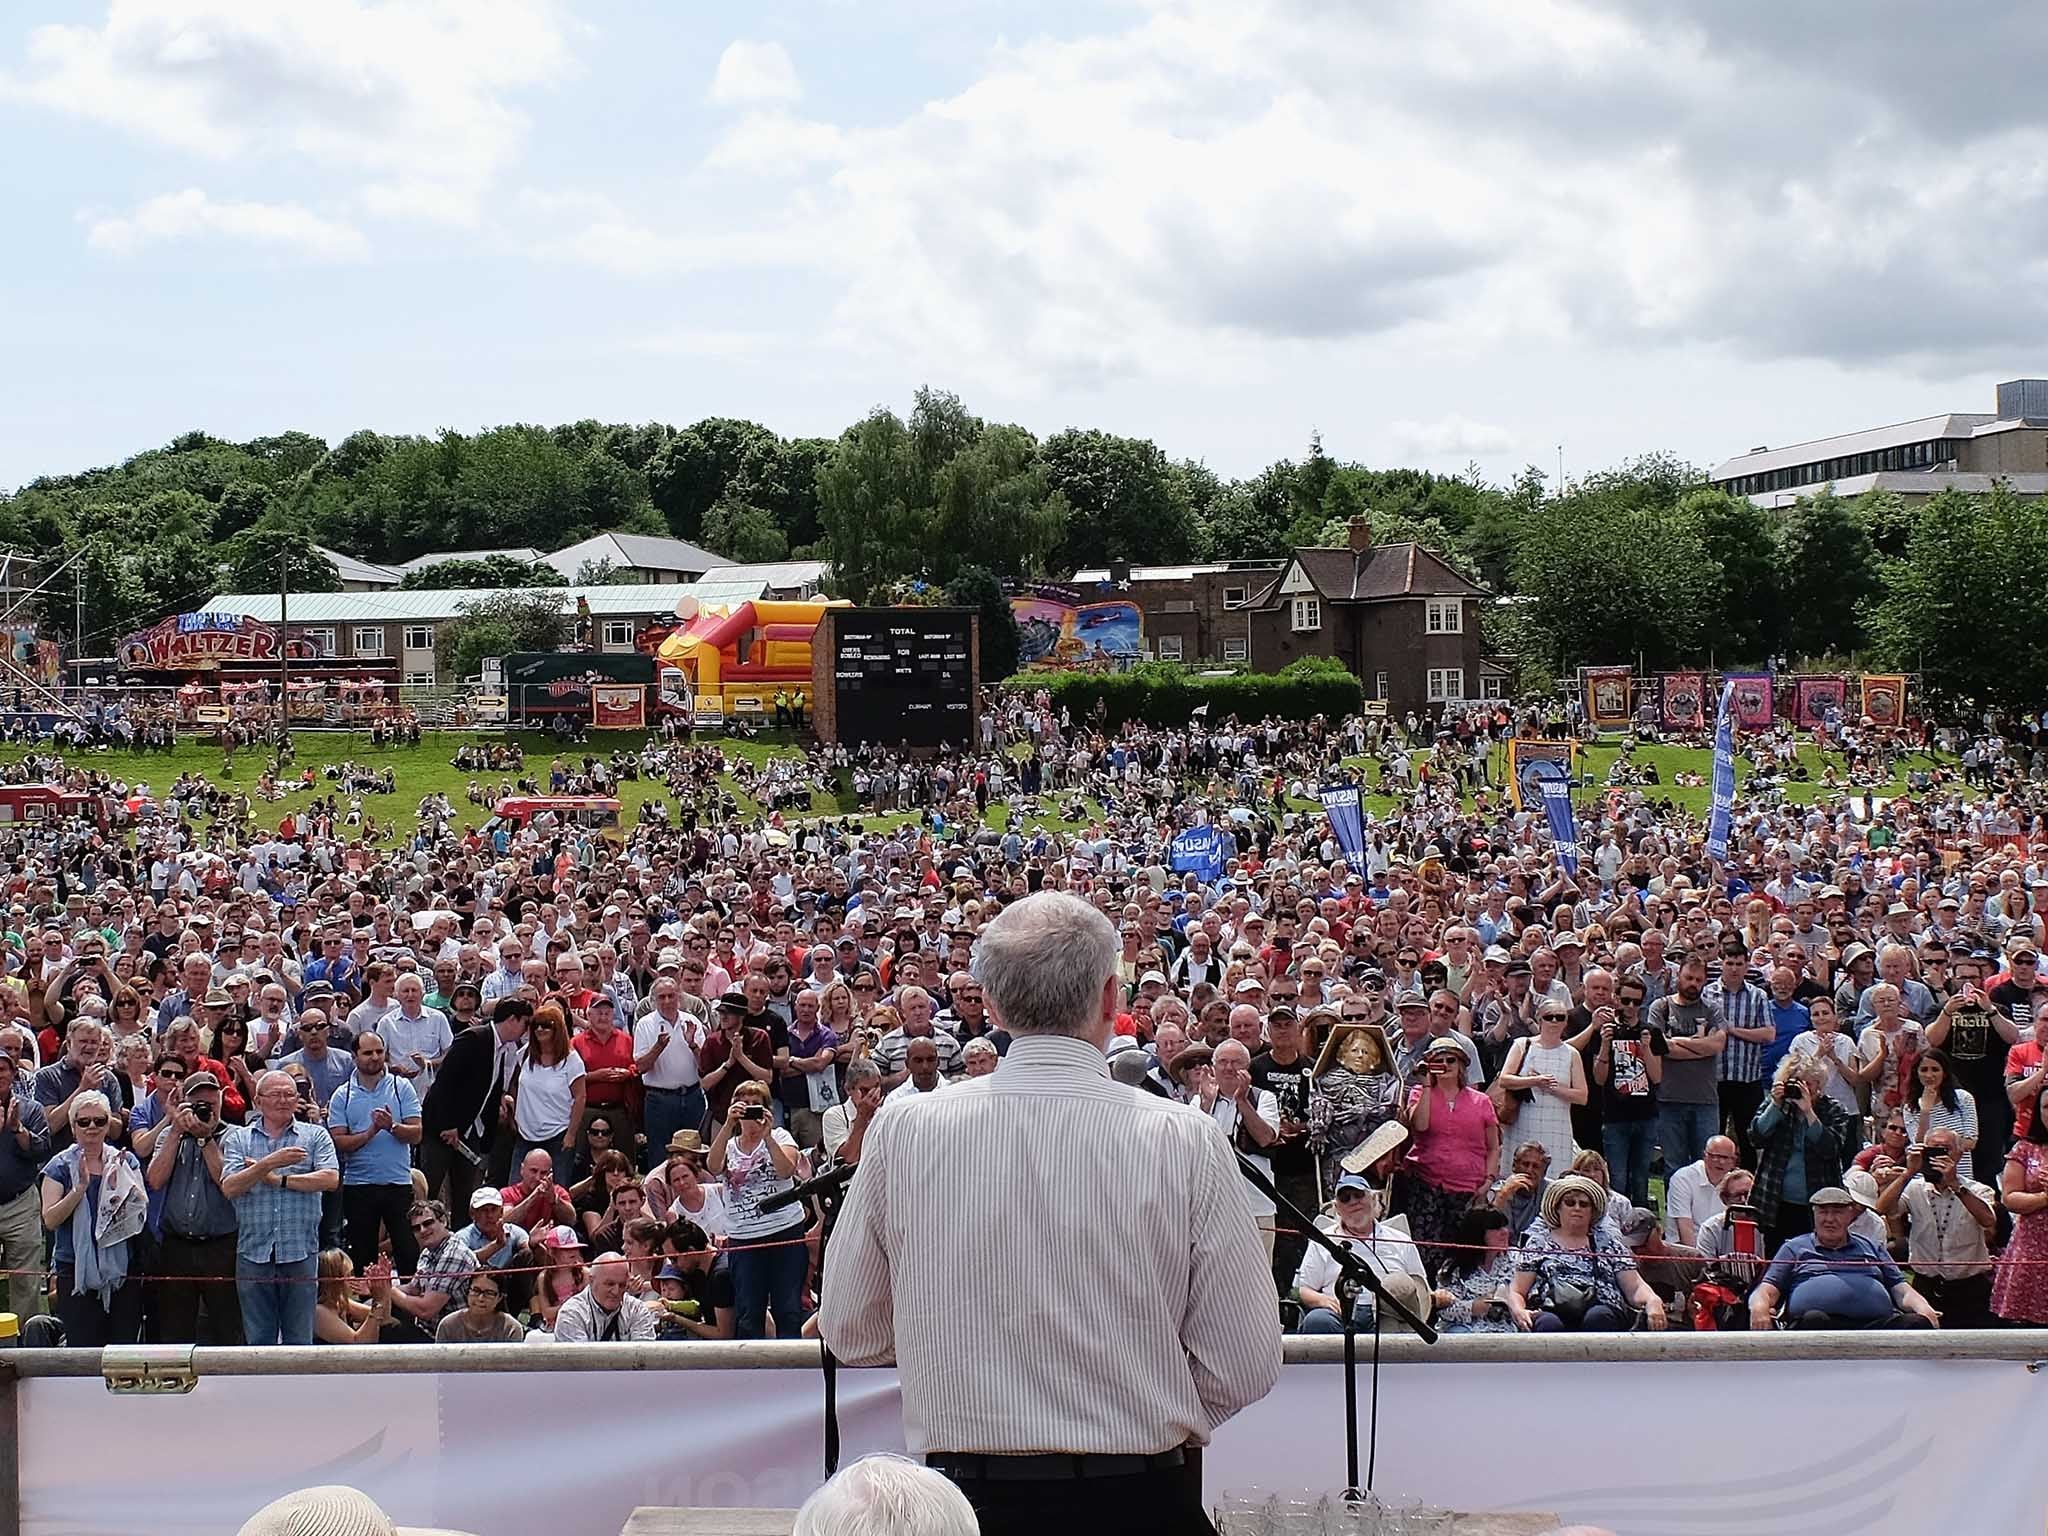 Jeremy Corbyn spoke at the 2015 gala, which was attended by an estimated 150,000